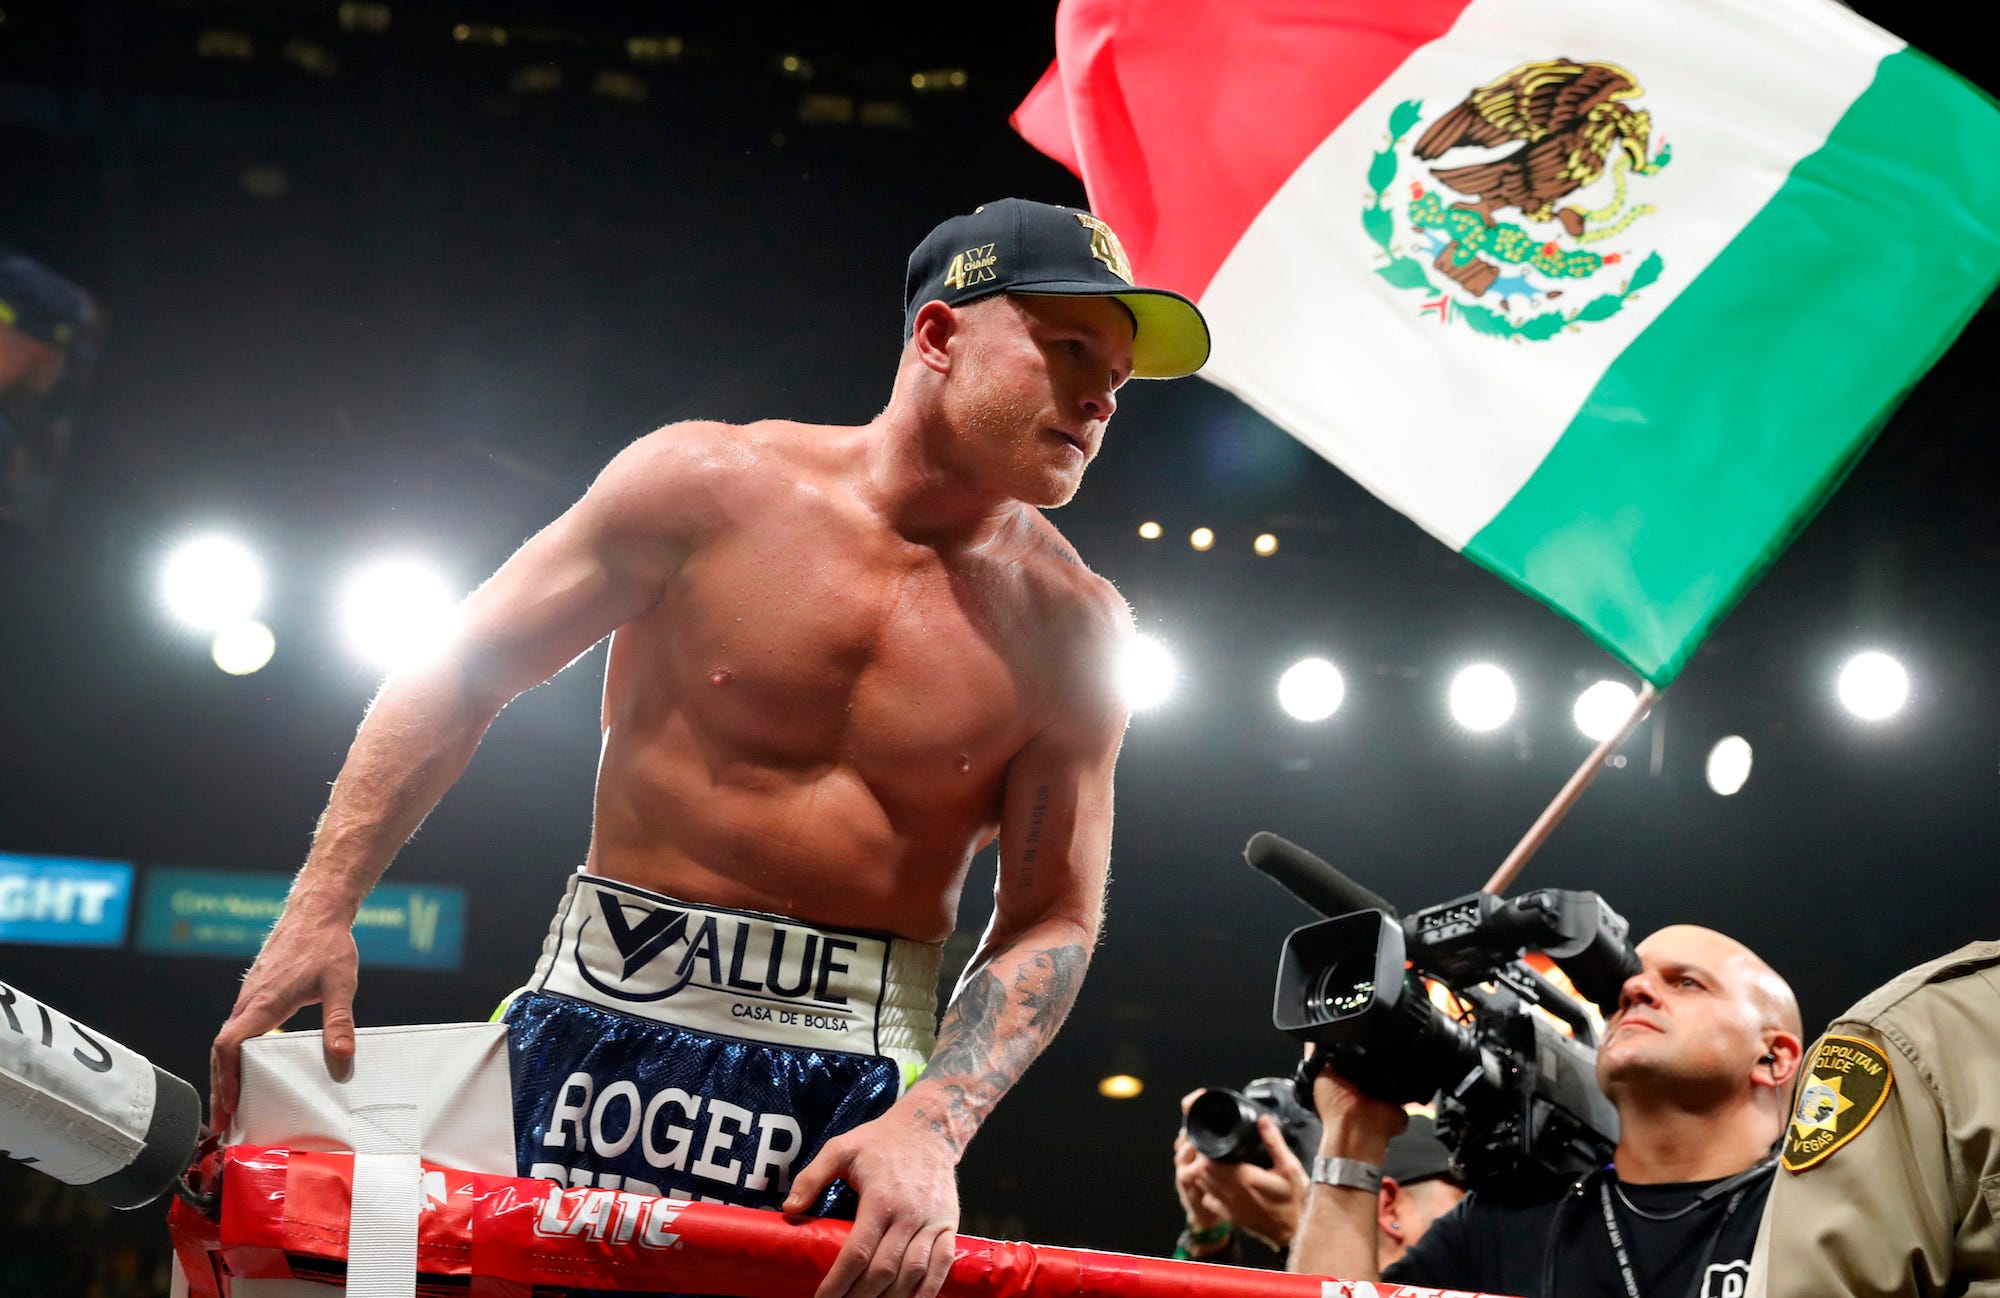 DAZN and Matchroom are bullish on their future in world boxing as they shape their present around Canelo Alvarez